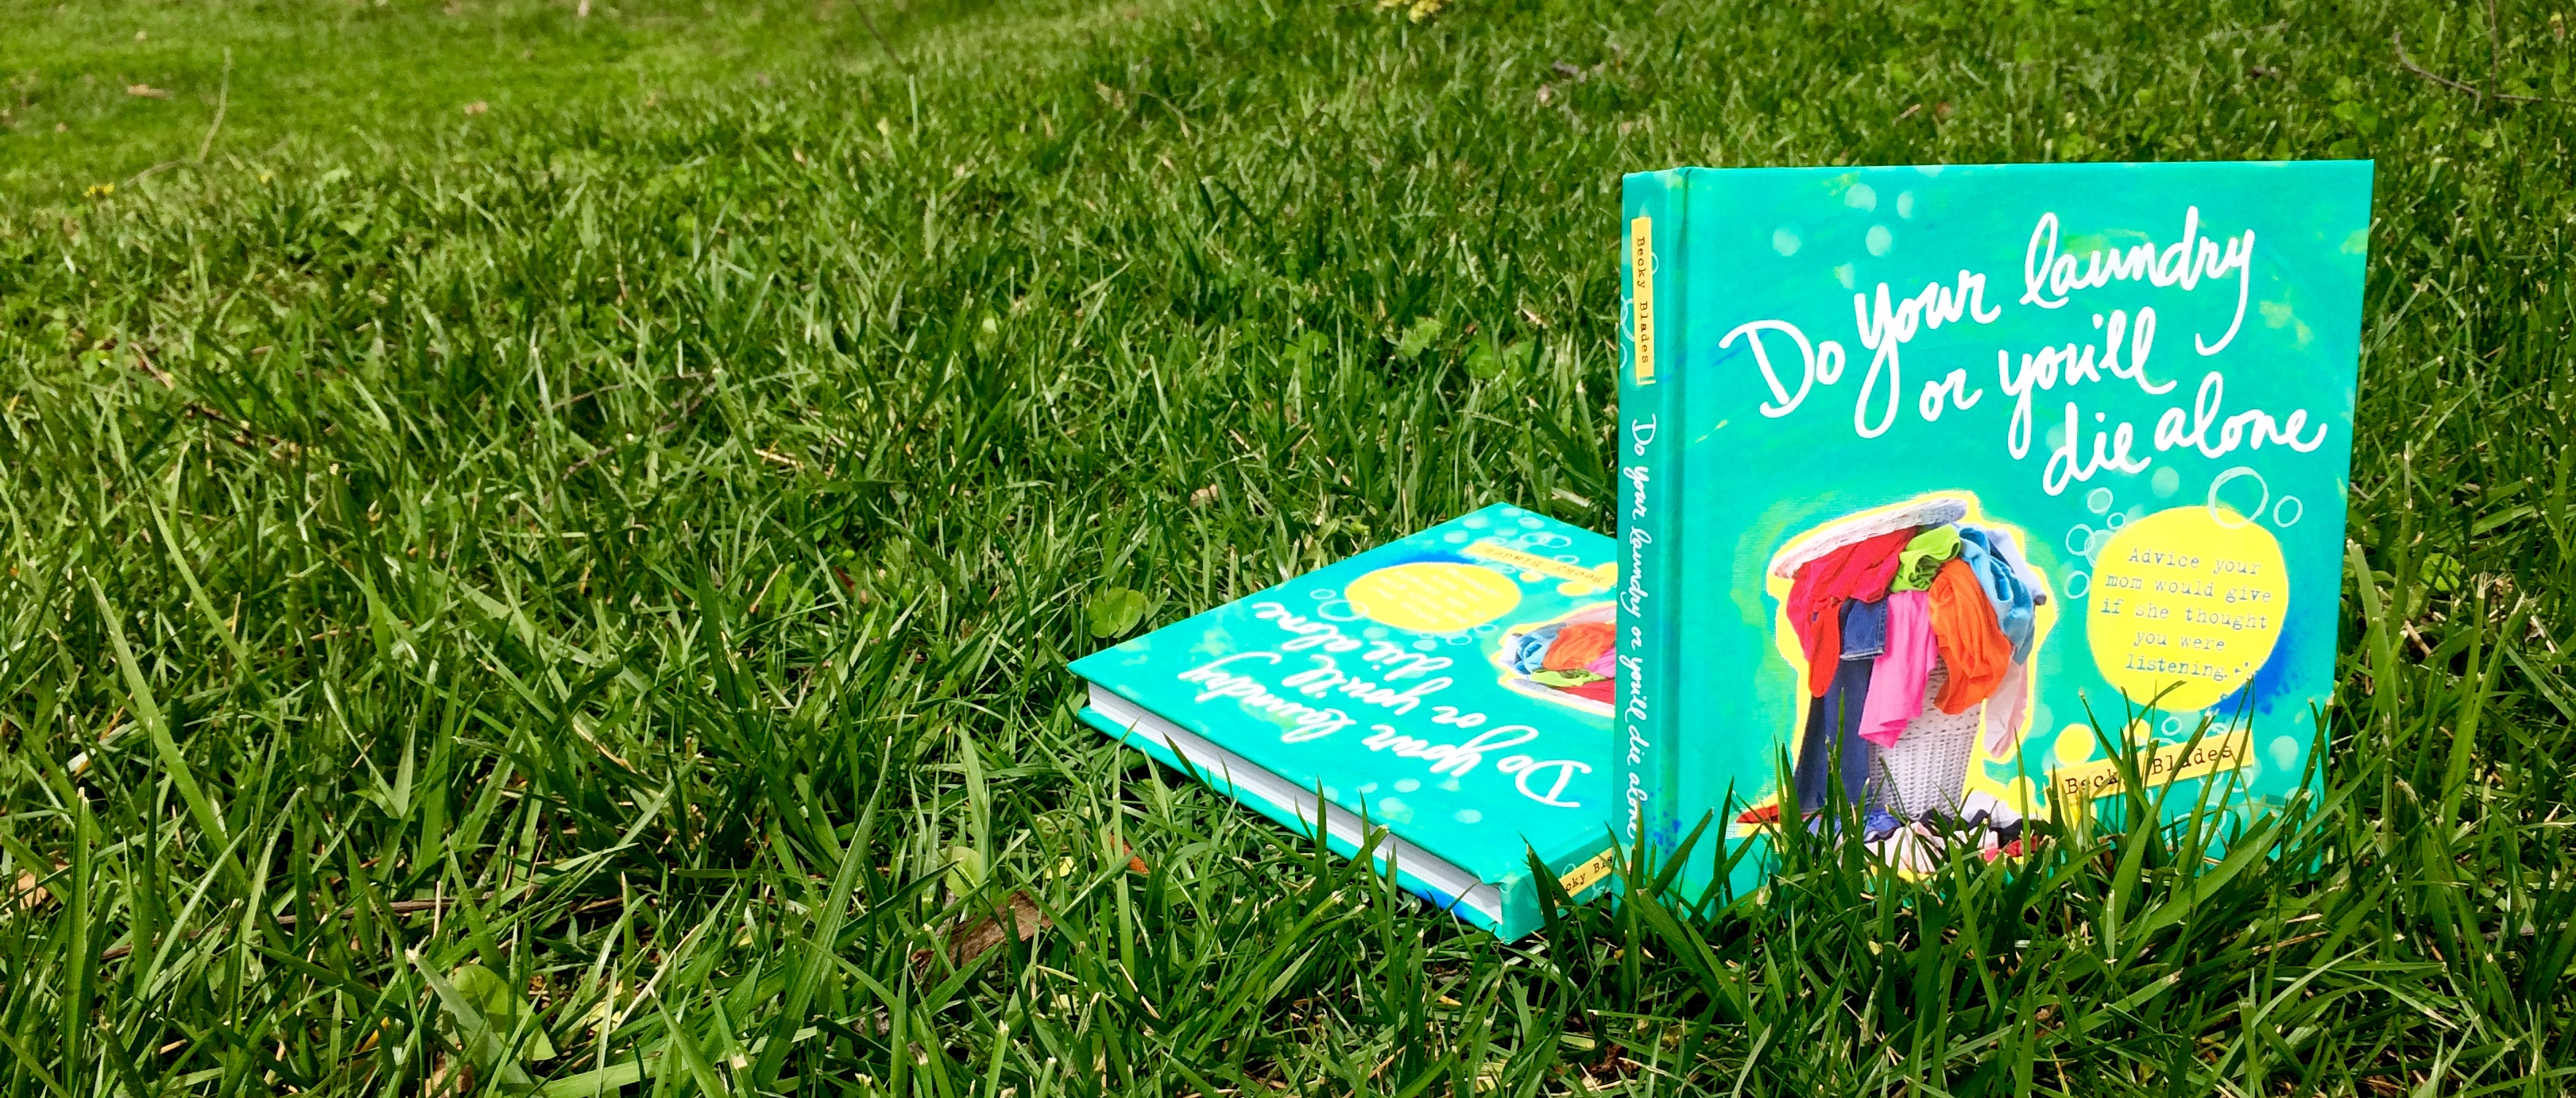 do your laundry or you'll die alone book photographed on grass background